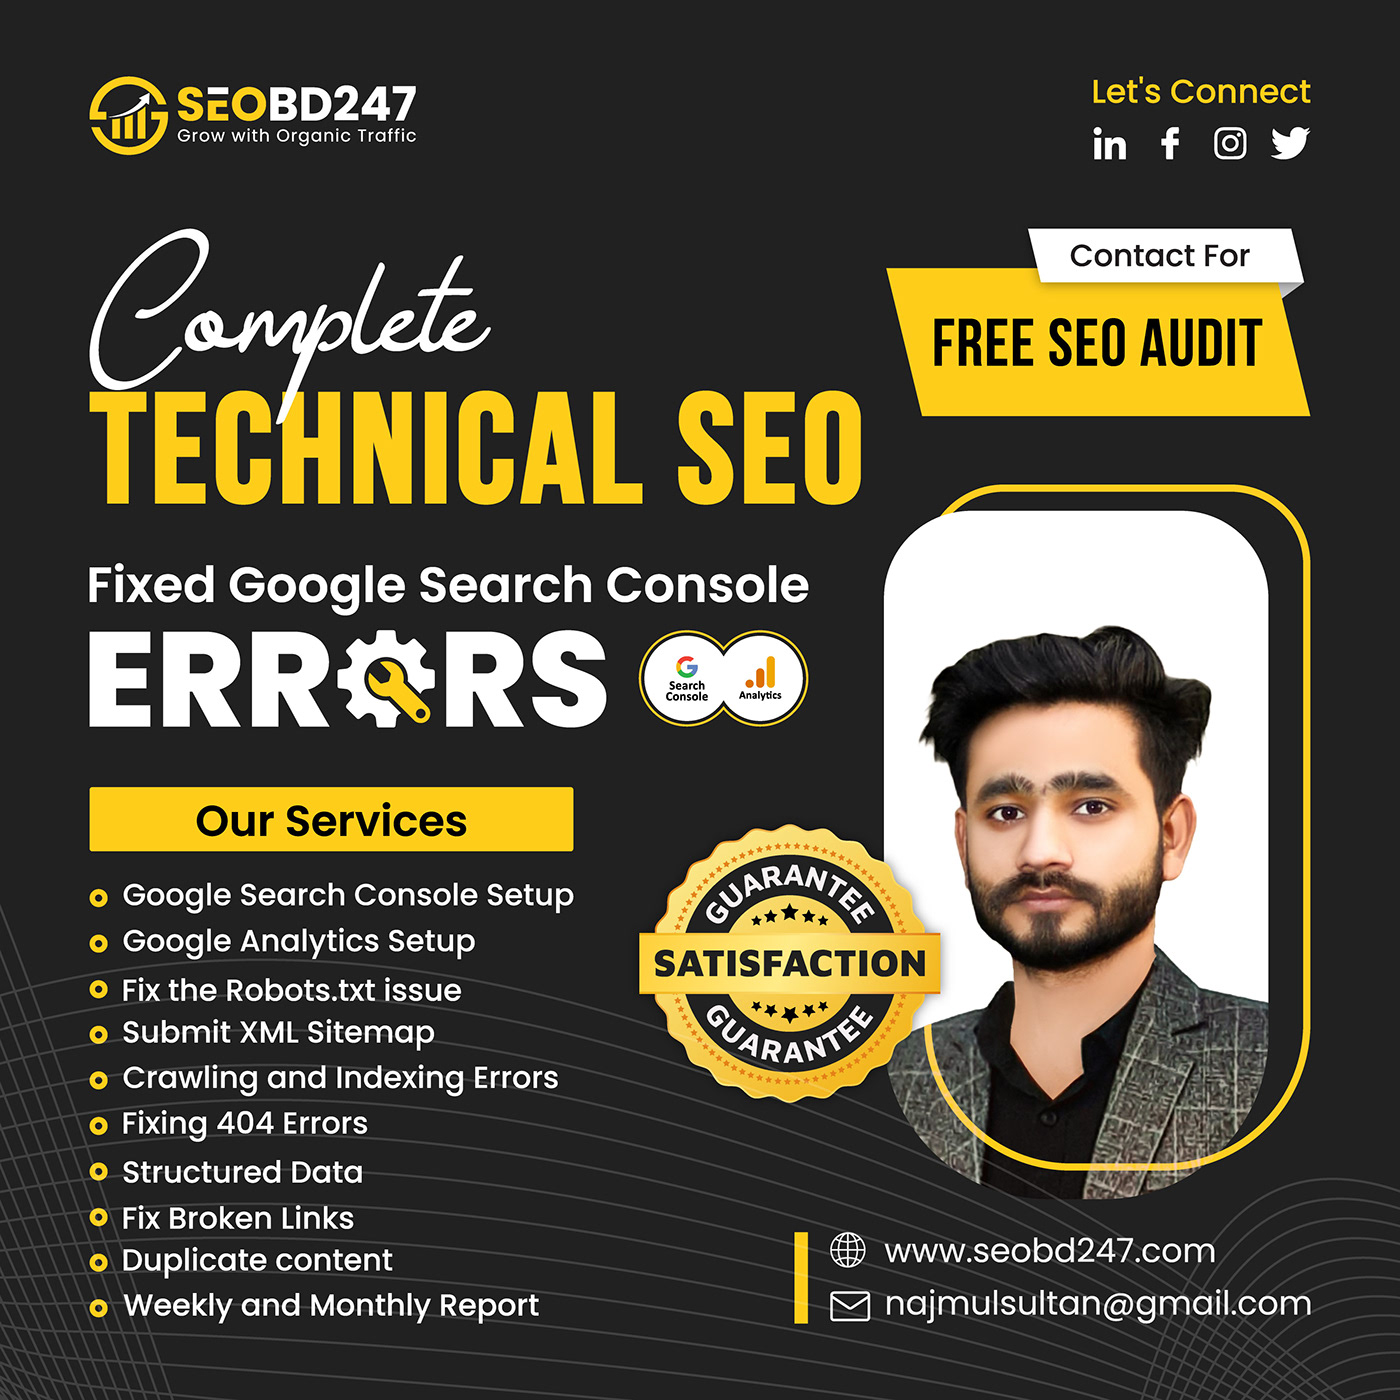 
Why is Technical SEO so important for ranking?